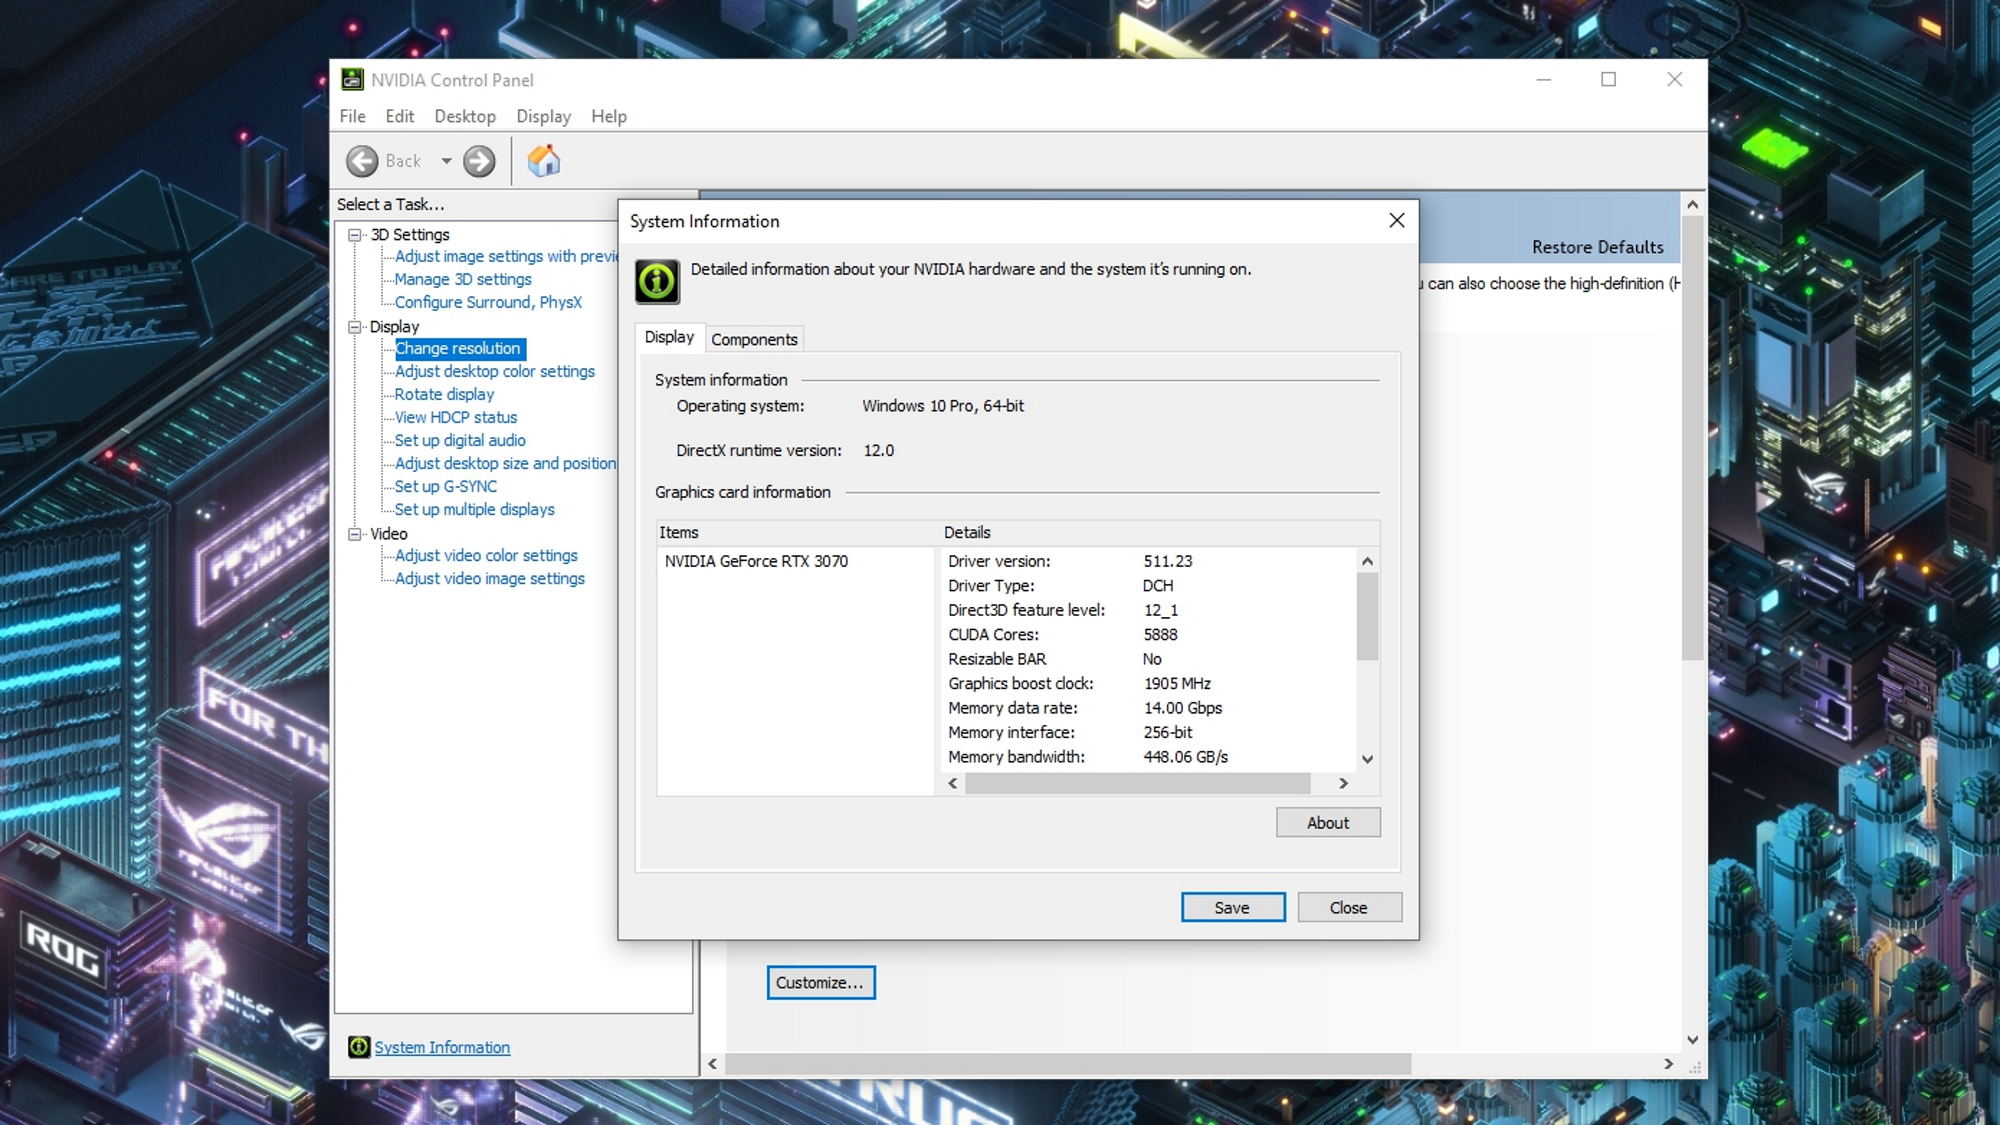 How to check the clock speed of the NVIDIA GPU in your ROG laptop or PC